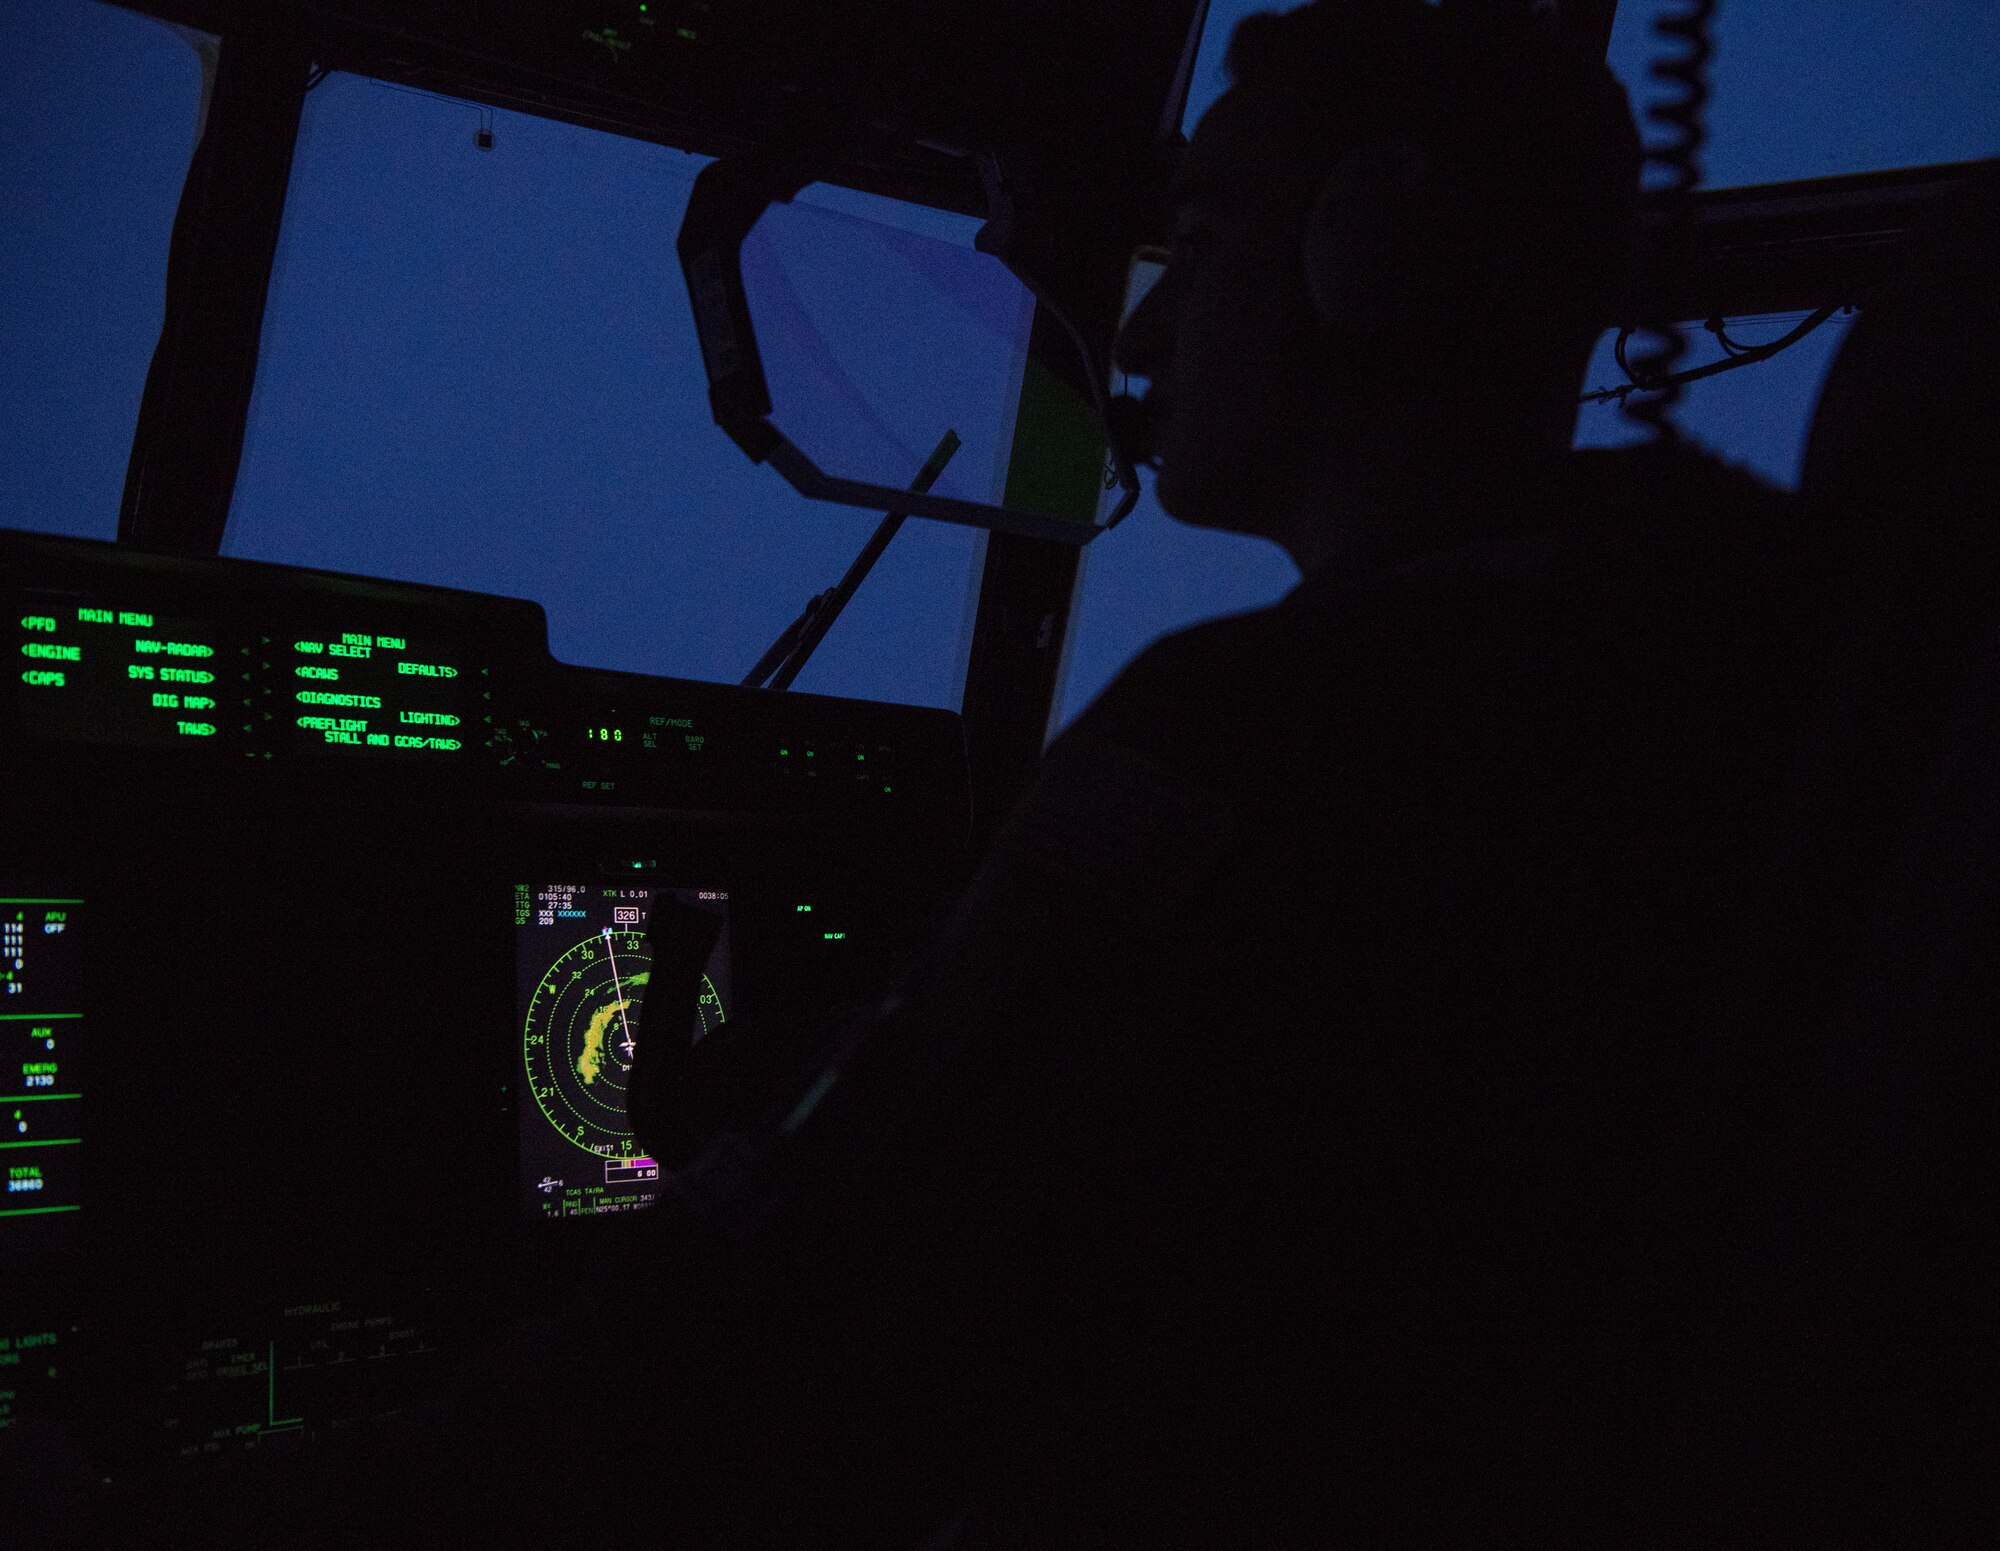 1st Lt. Tim Viere, a pilot for the 53rd Weather Reconnaissance Squadron, flies through the eye of Hurricane Laura from Charleston International Airport, S.C. Aug. 25, 2020. The 53rd WRS operates out of Keesler Air Force Base, Miss., and plays an important role in the forecasting of tropical systems by flying directly into storms and collecting atmospheric data satellites cannot reach, improving the area of impact by up to 25 percent. (U.S. Air Force photo by Senior Airman Kristen Pittman)